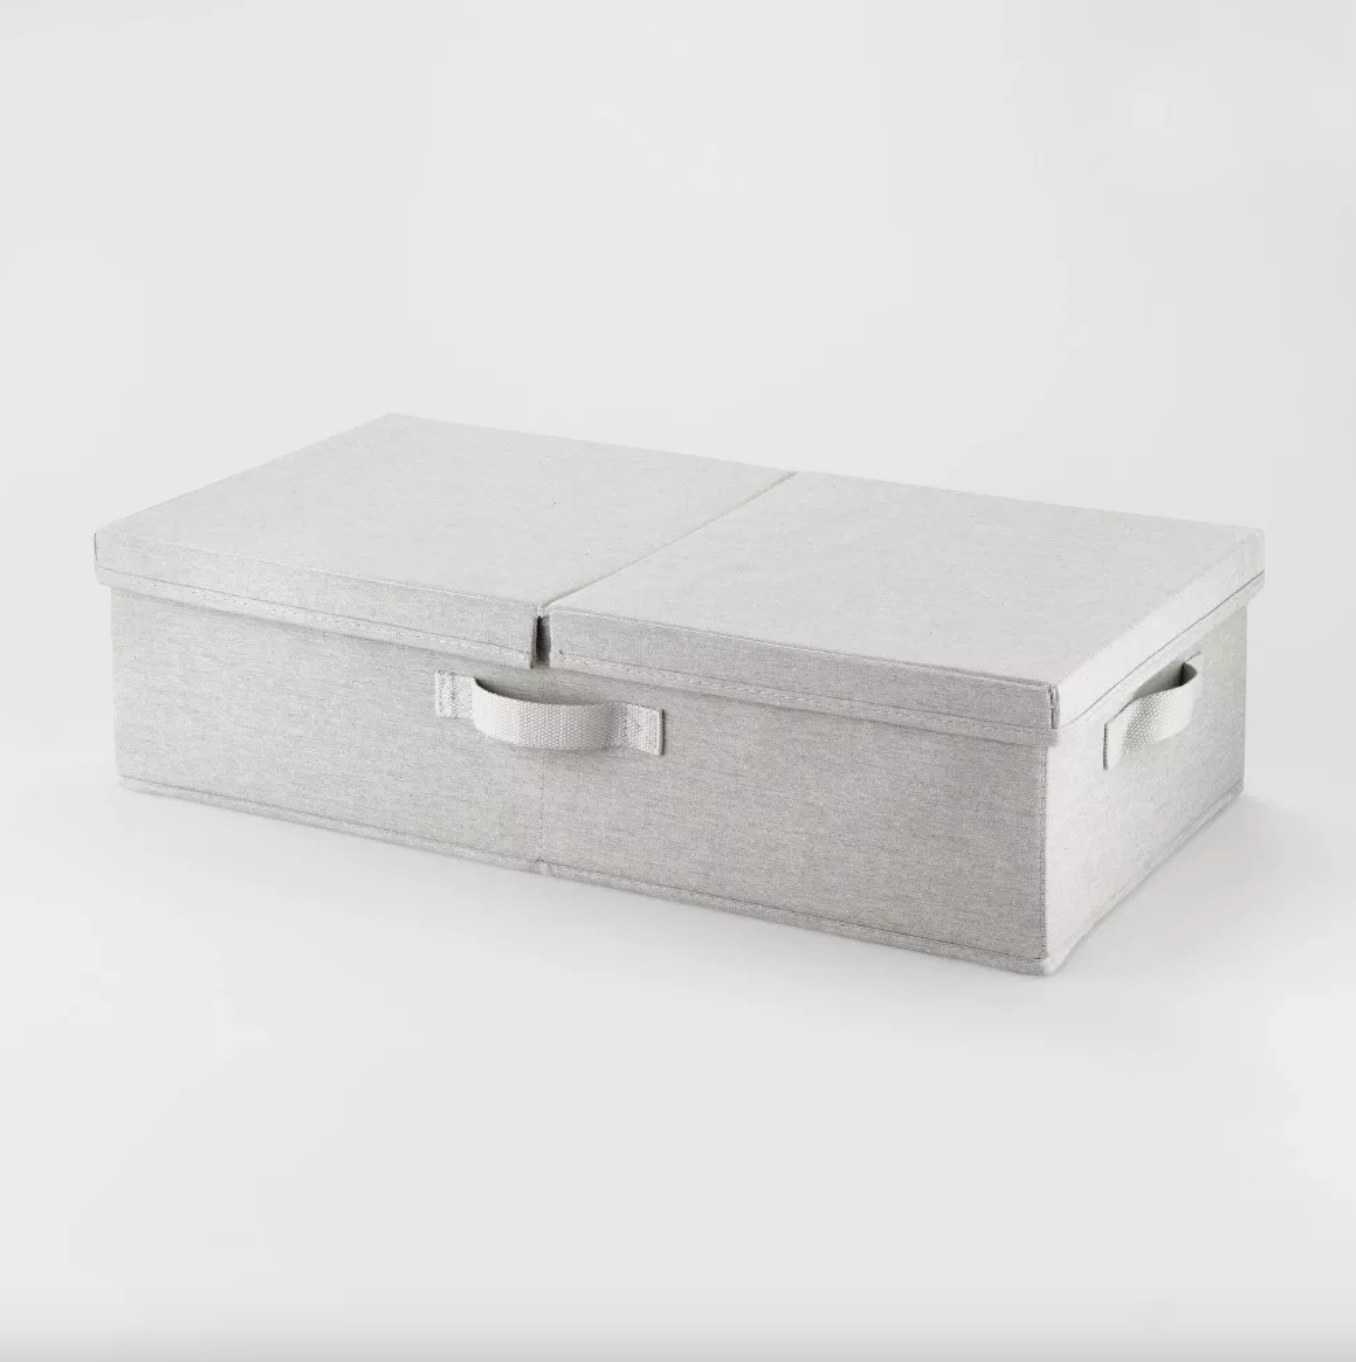 the light grey fabric bin with hard sides and a lid